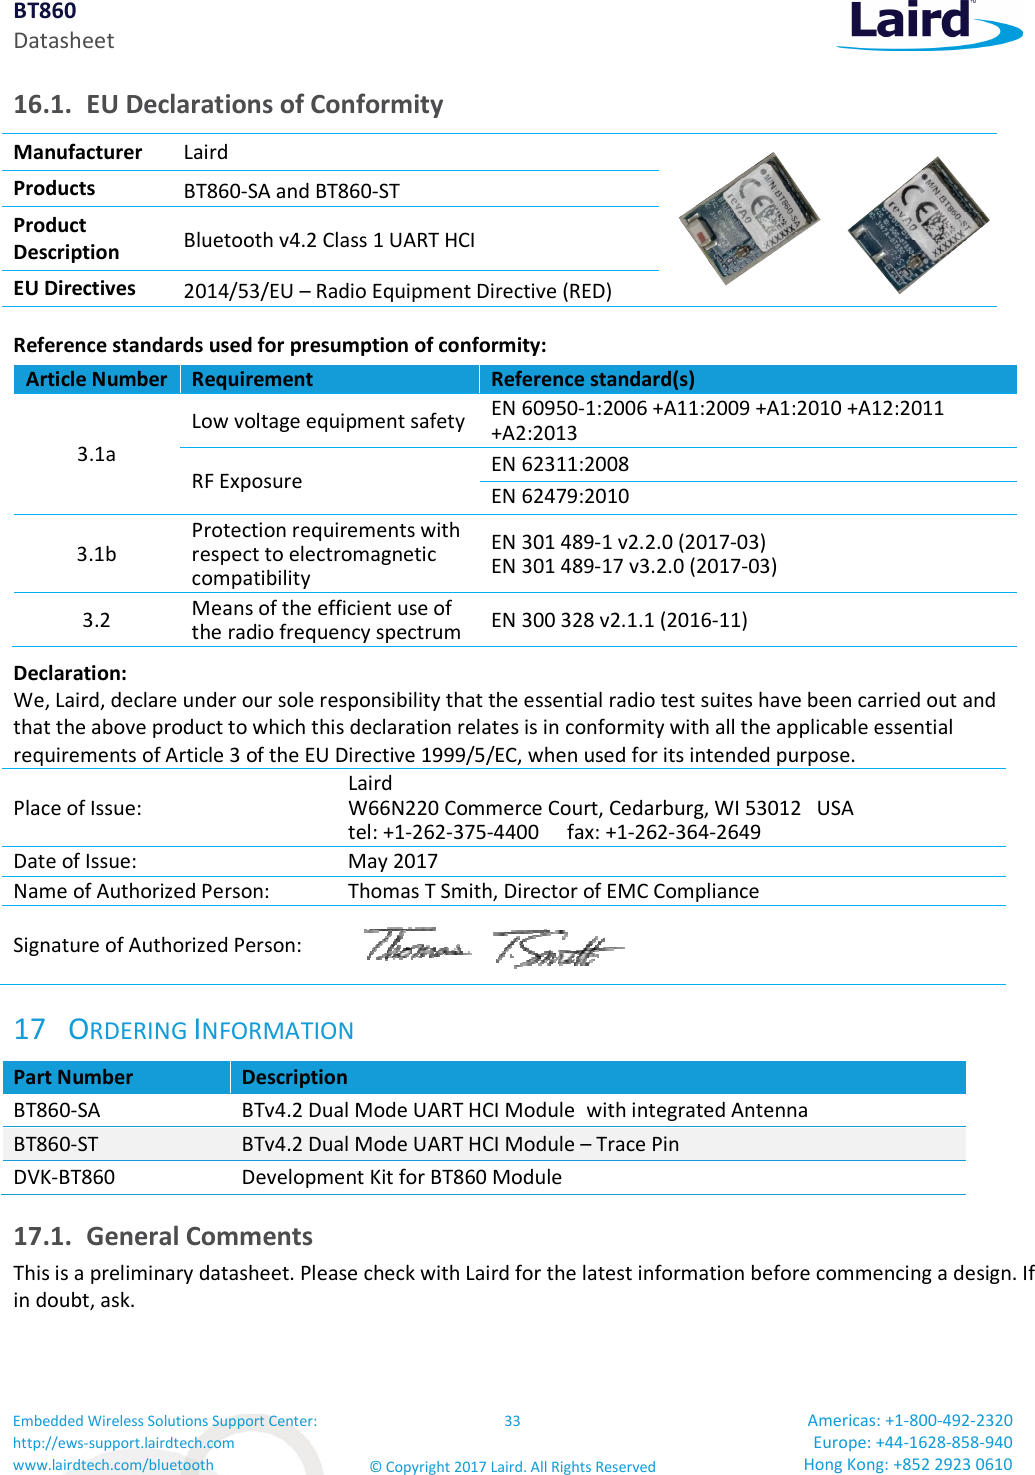 BT860 Datasheet Embedded Wireless Solutions Support Center: http://ews-support.lairdtech.com www.lairdtech.com/bluetooth 33 © Copyright 2017 Laird. All Rights Reserved Americas: +1-800-492-2320 Europe: +44-1628-858-940 Hong Kong: +852 2923 0610  16.1. EU Declarations of Conformity Manufacturer  Laird   Products  BT860-SA and BT860-ST Product  Description  Bluetooth v4.2 Class 1 UART HCI EU Directives  2014/53/EU – Radio Equipment Directive (RED) Reference standards used for presumption of conformity:  Article Number Requirement  Reference standard(s) 3.1a Low voltage equipment safety EN 60950-1:2006 +A11:2009 +A1:2010 +A12:2011 +A2:2013 RF Exposure  EN 62311:2008 EN 62479:2010 3.1b Protection requirements with respect to electromagnetic compatibility EN 301 489-1 v2.2.0 (2017-03) EN 301 489-17 v3.2.0 (2017-03) 3.2  Means of the efficient use of the radio frequency spectrum EN 300 328 v2.1.1 (2016-11) Declaration: We, Laird, declare under our sole responsibility that the essential radio test suites have been carried out and that the above product to which this declaration relates is in conformity with all the applicable essential requirements of Article 3 of the EU Directive 1999/5/EC, when used for its intended purpose. Place of Issue: Laird  W66N220 Commerce Court, Cedarburg, WI 53012   USA tel: +1-262-375-4400  fax: +1-262-364-2649 Date of Issue:  May 2017 Name of Authorized Person:  Thomas T Smith, Director of EMC Compliance Signature of Authorized Person:  17 ORDERING INFORMATION Part Number  Description BT860-SA  BTv4.2 Dual Mode UART HCI Module with integrated Antenna BT860-ST  BTv4.2 Dual Mode UART HCI Module – Trace Pin DVK-BT860  Development Kit for BT860 Module 17.1. General Comments This is a preliminary datasheet. Please check with Laird for the latest information before commencing a design. If in doubt, ask.   